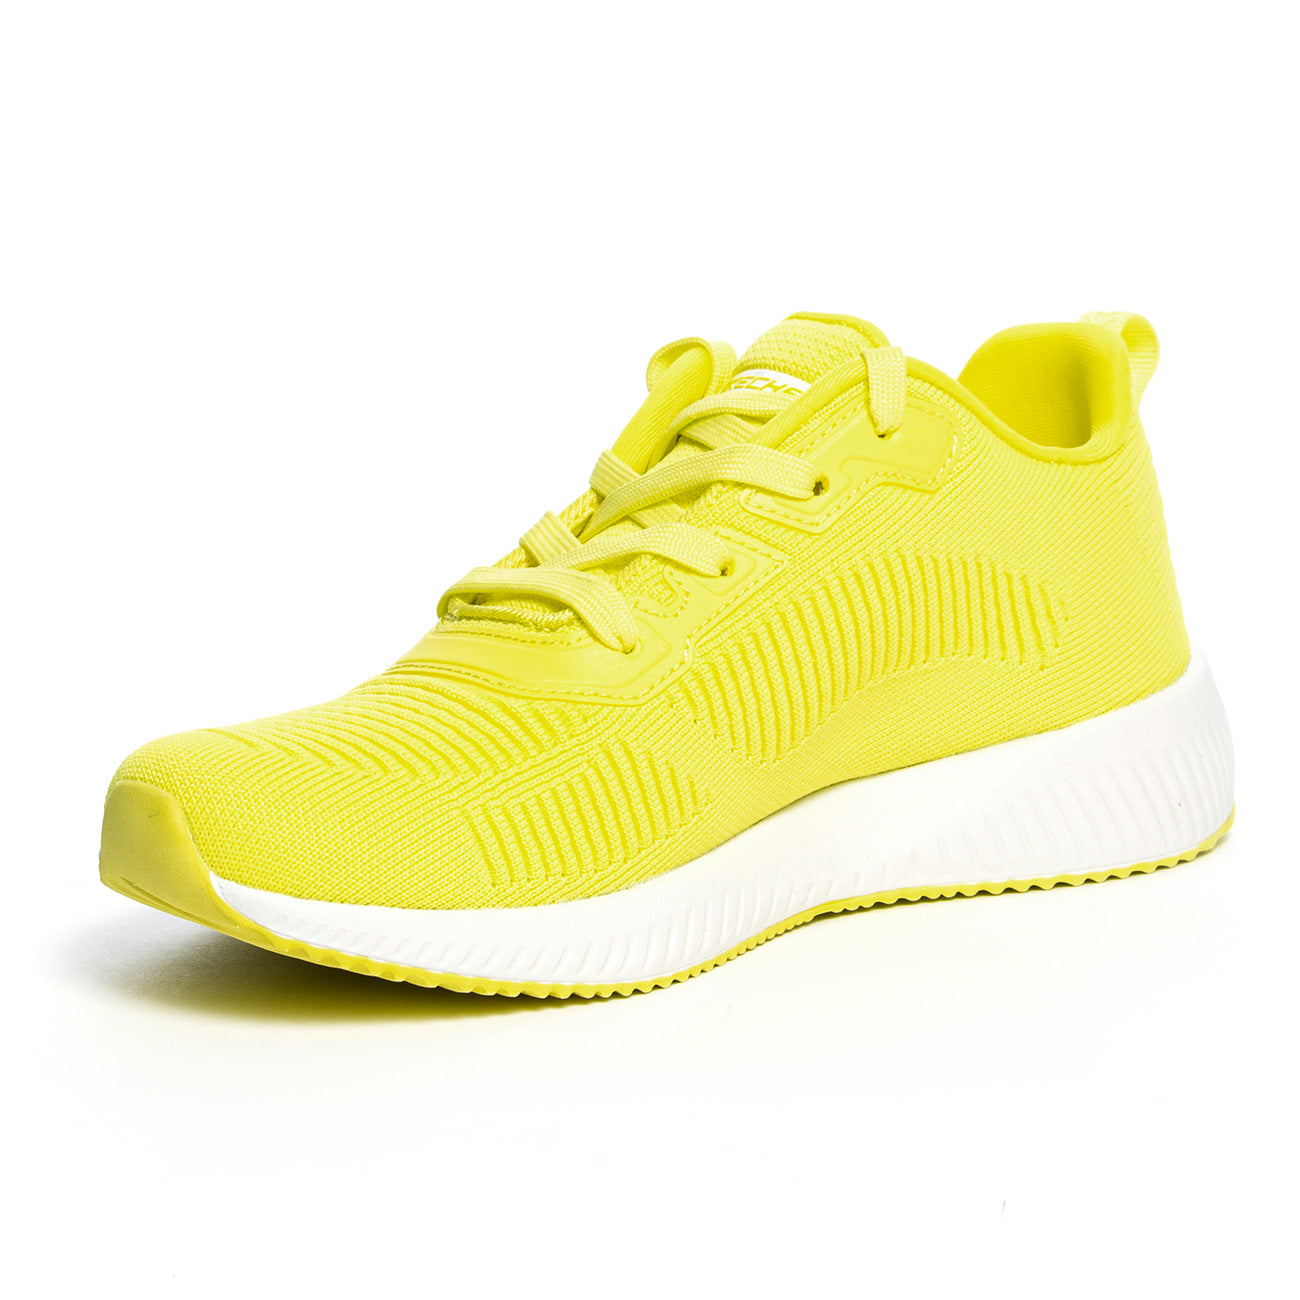 SNEAKERS SKECHERS BOBS SQUAD-GLOWRIDER GIALLE